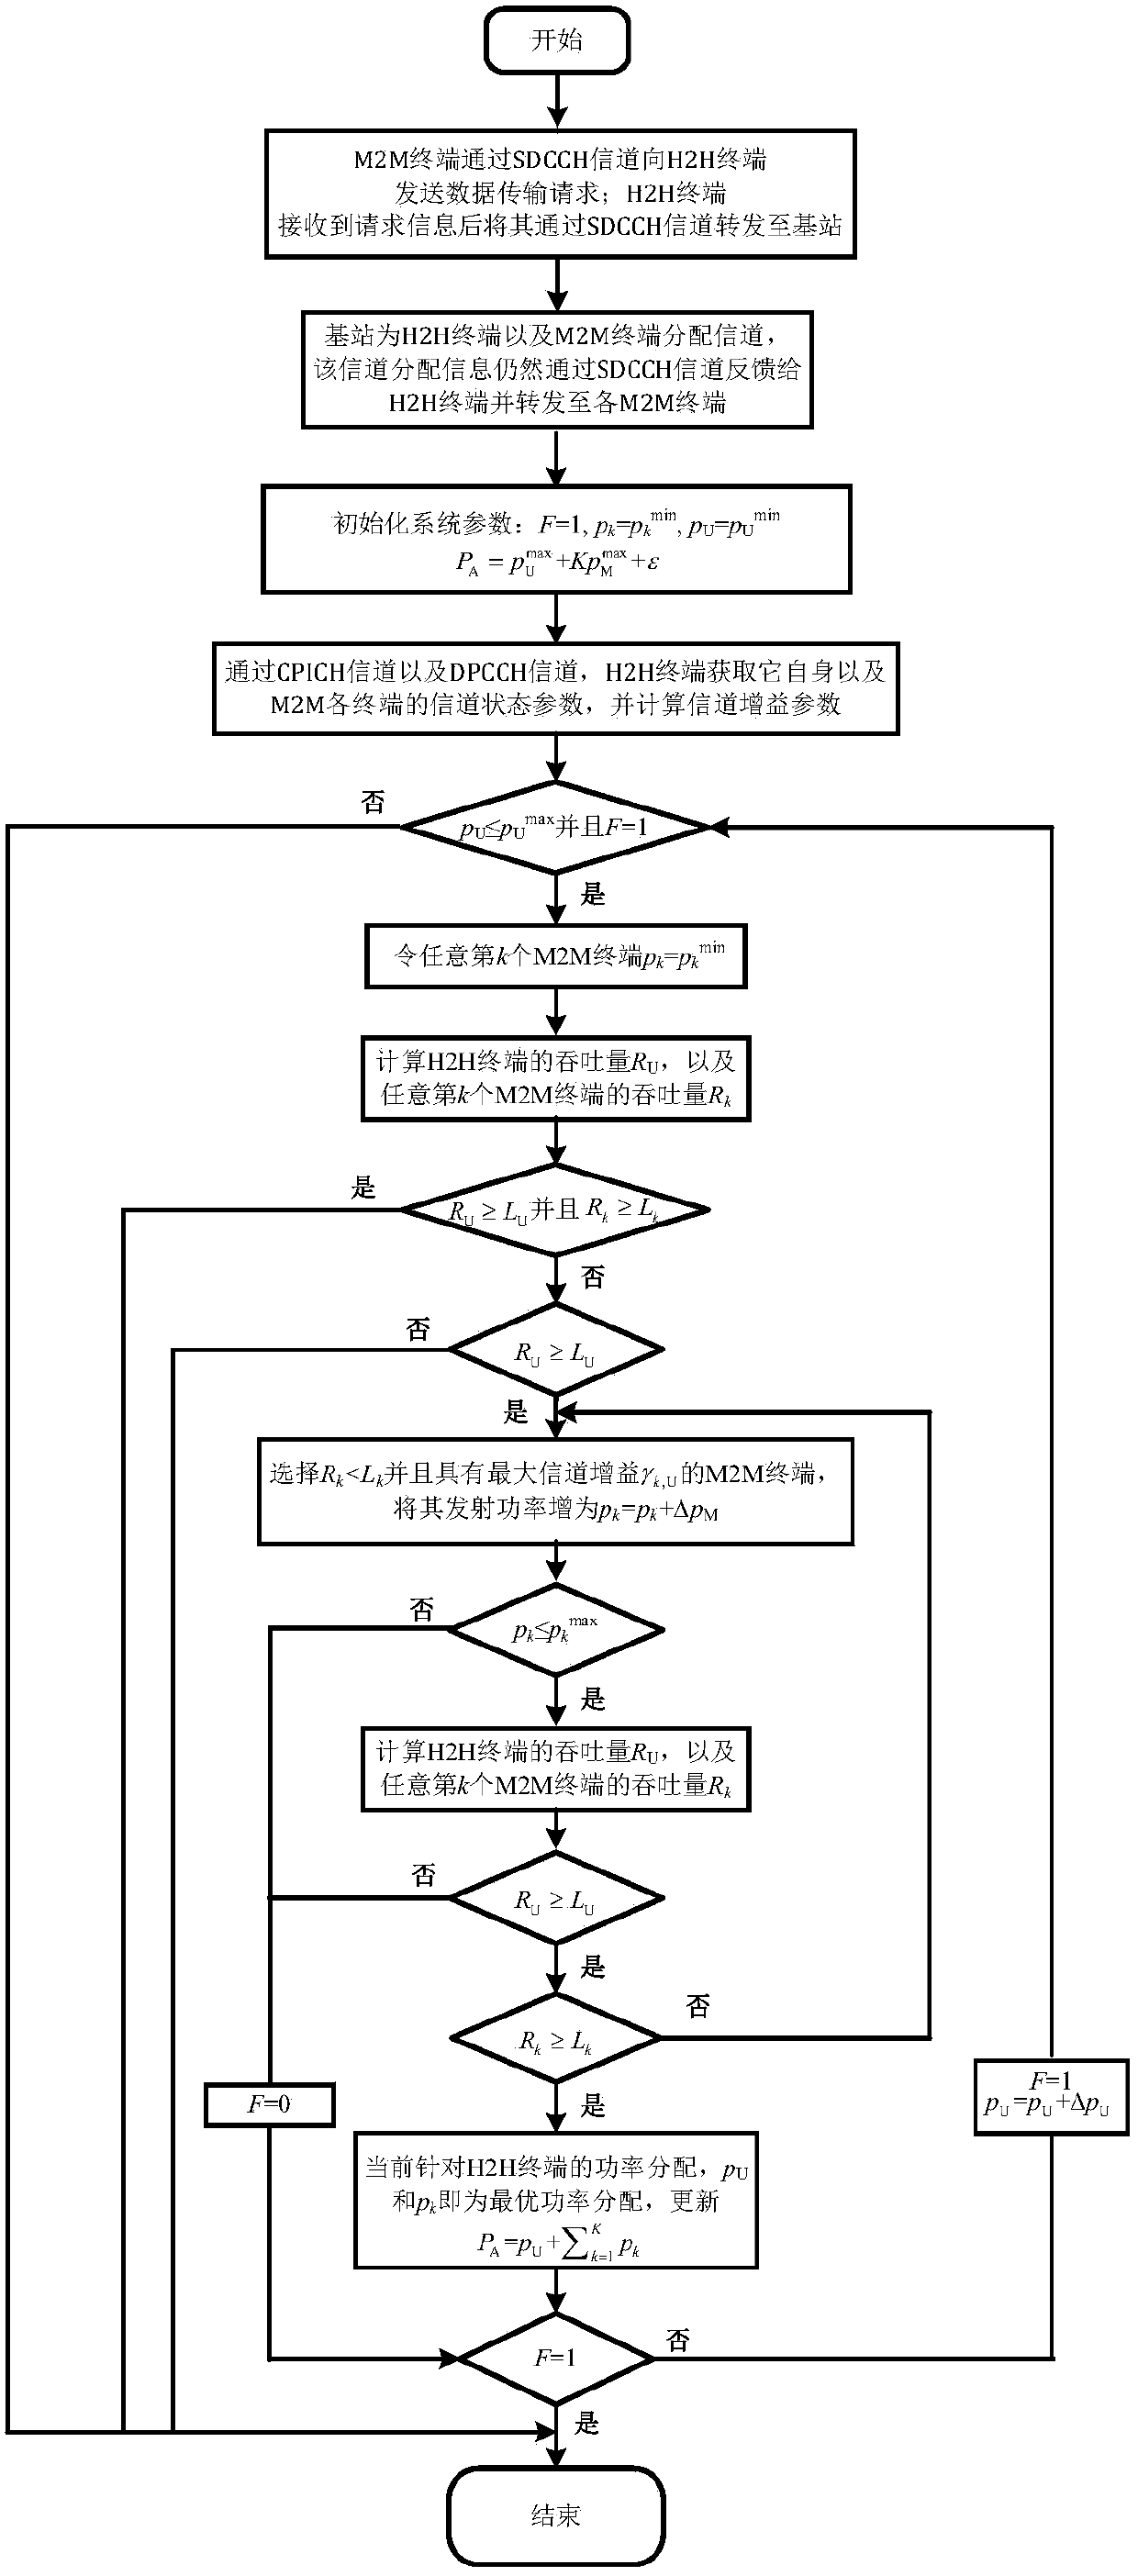 Coordinated control method for transmit power of h2h and m2m terminals in mobile network